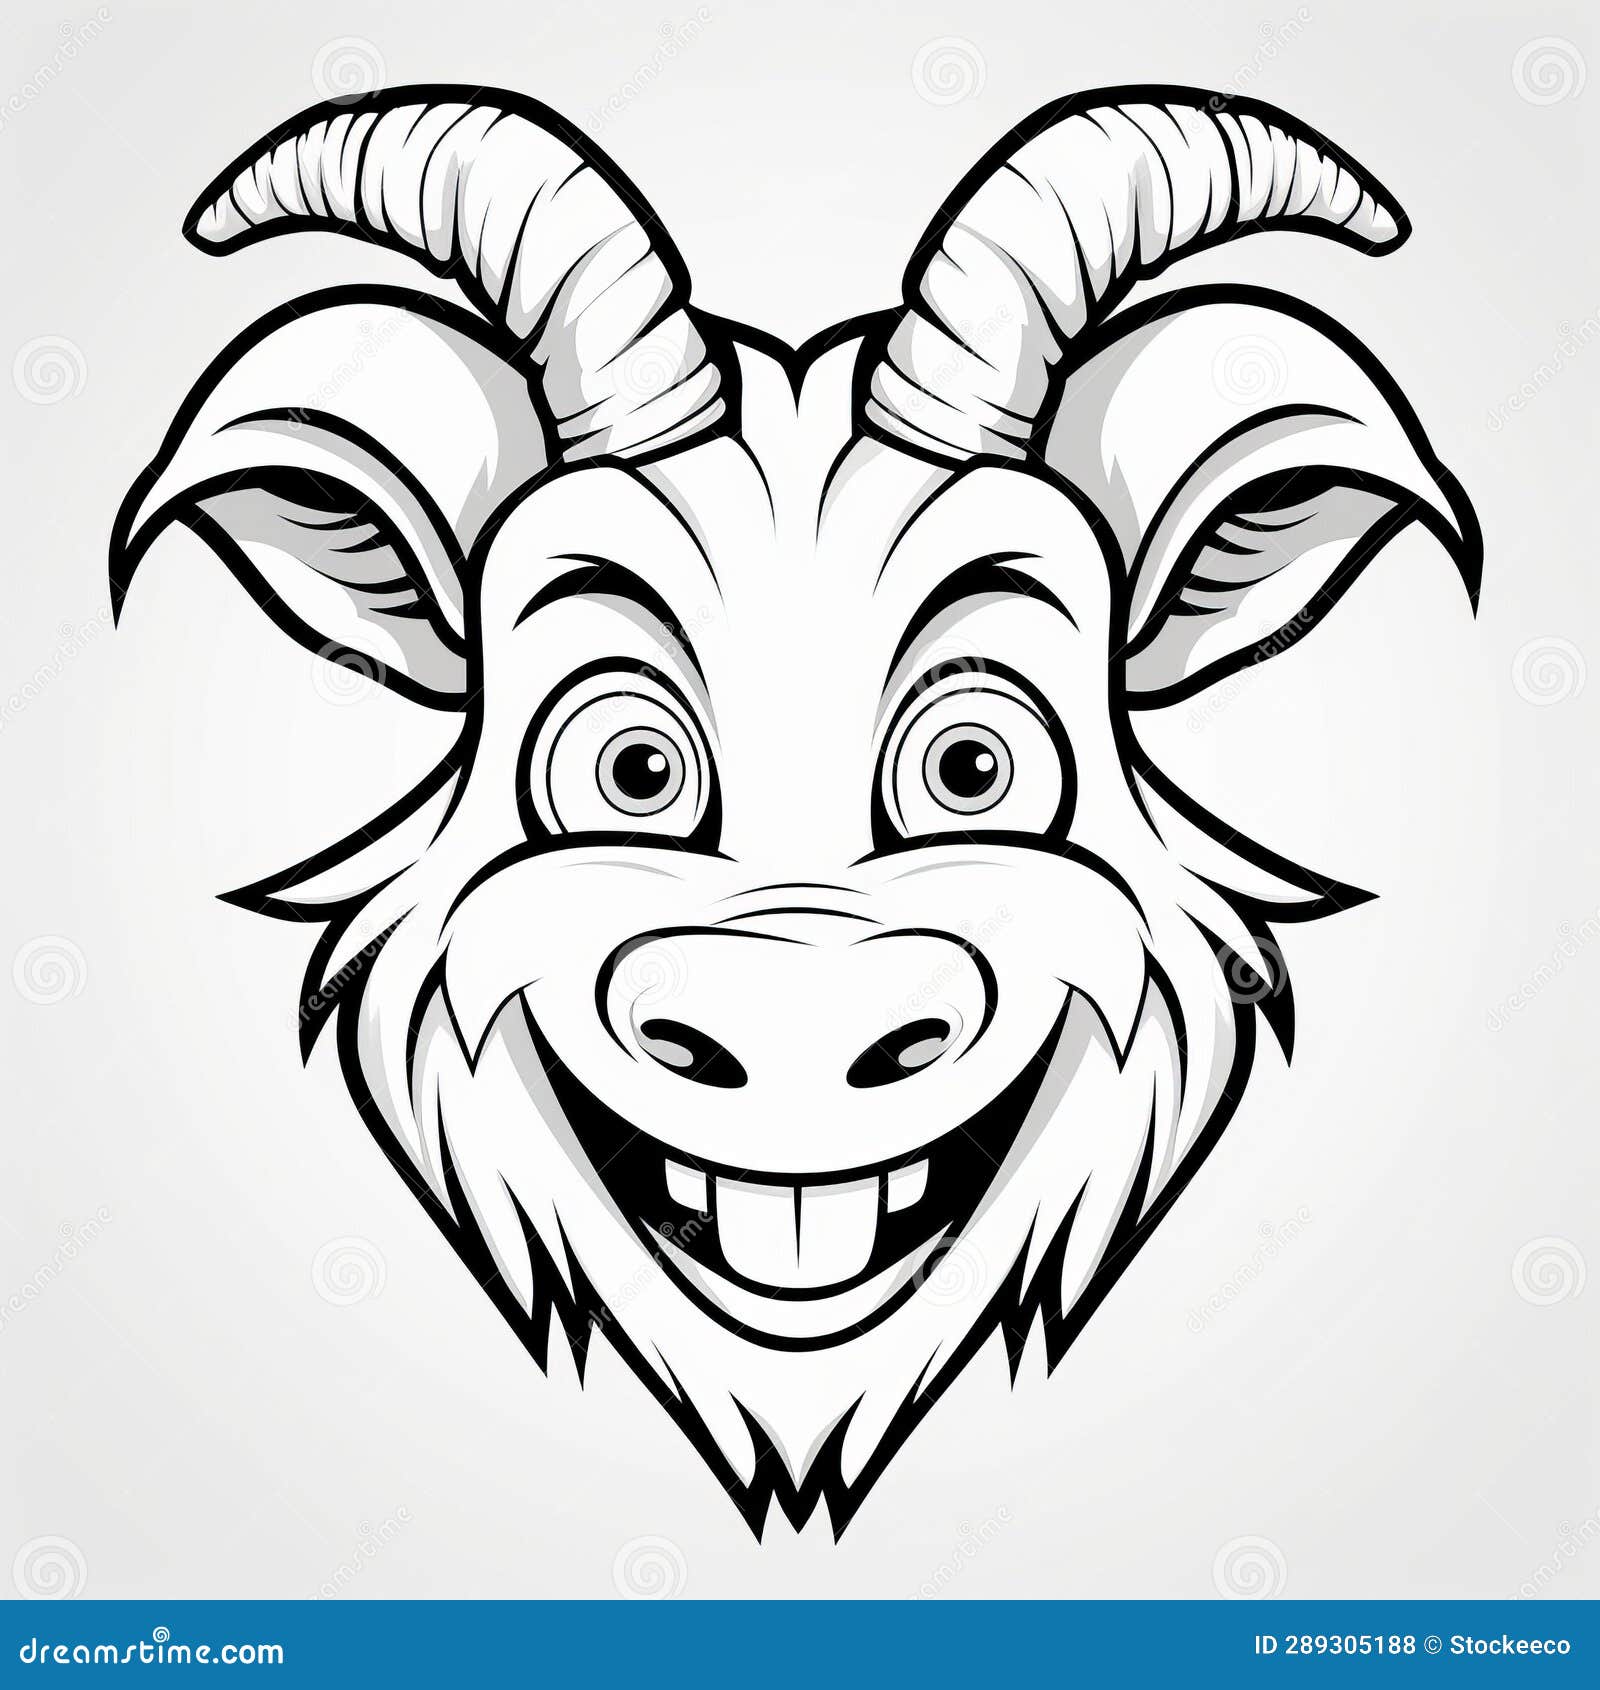 symmetrical harmony lively cartoon goat head tattoo black white coloring book whimsical funny smiling playful 289305188